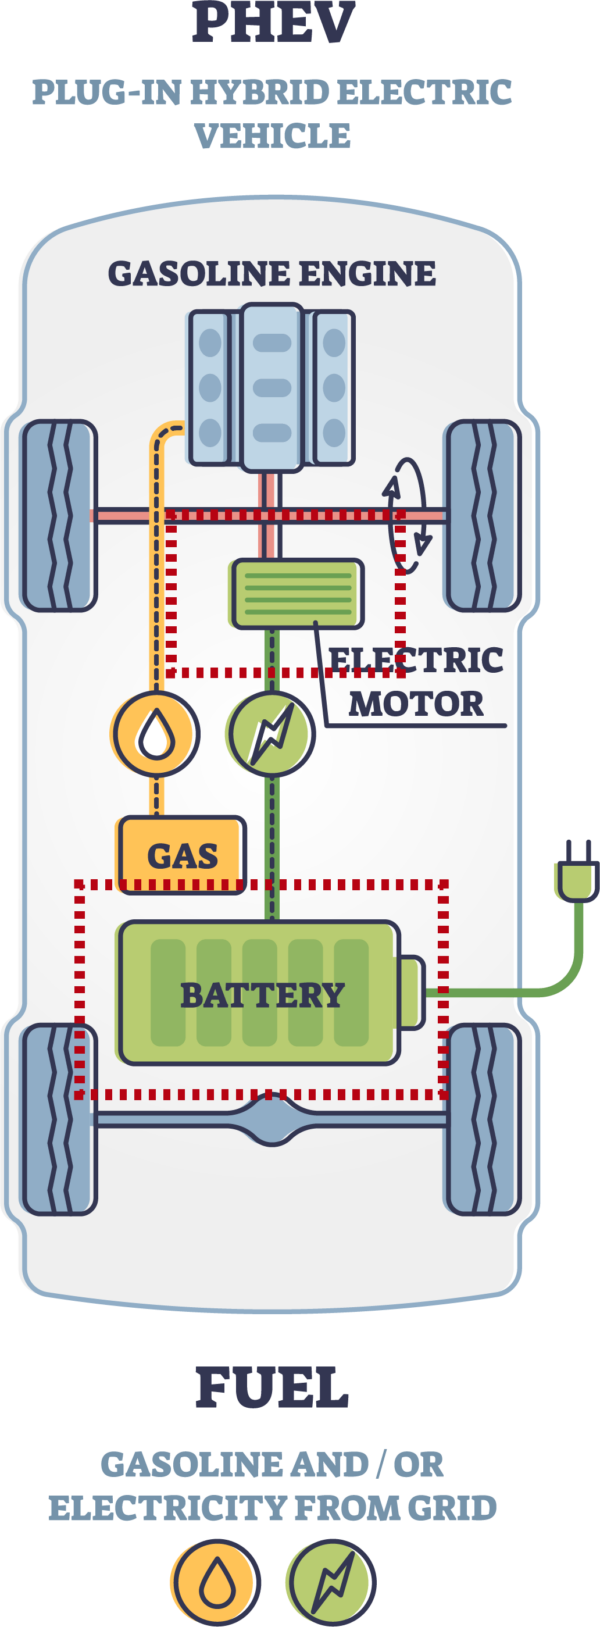 Electromagnetic Radiation Safety: Hybrid & Electric Cars